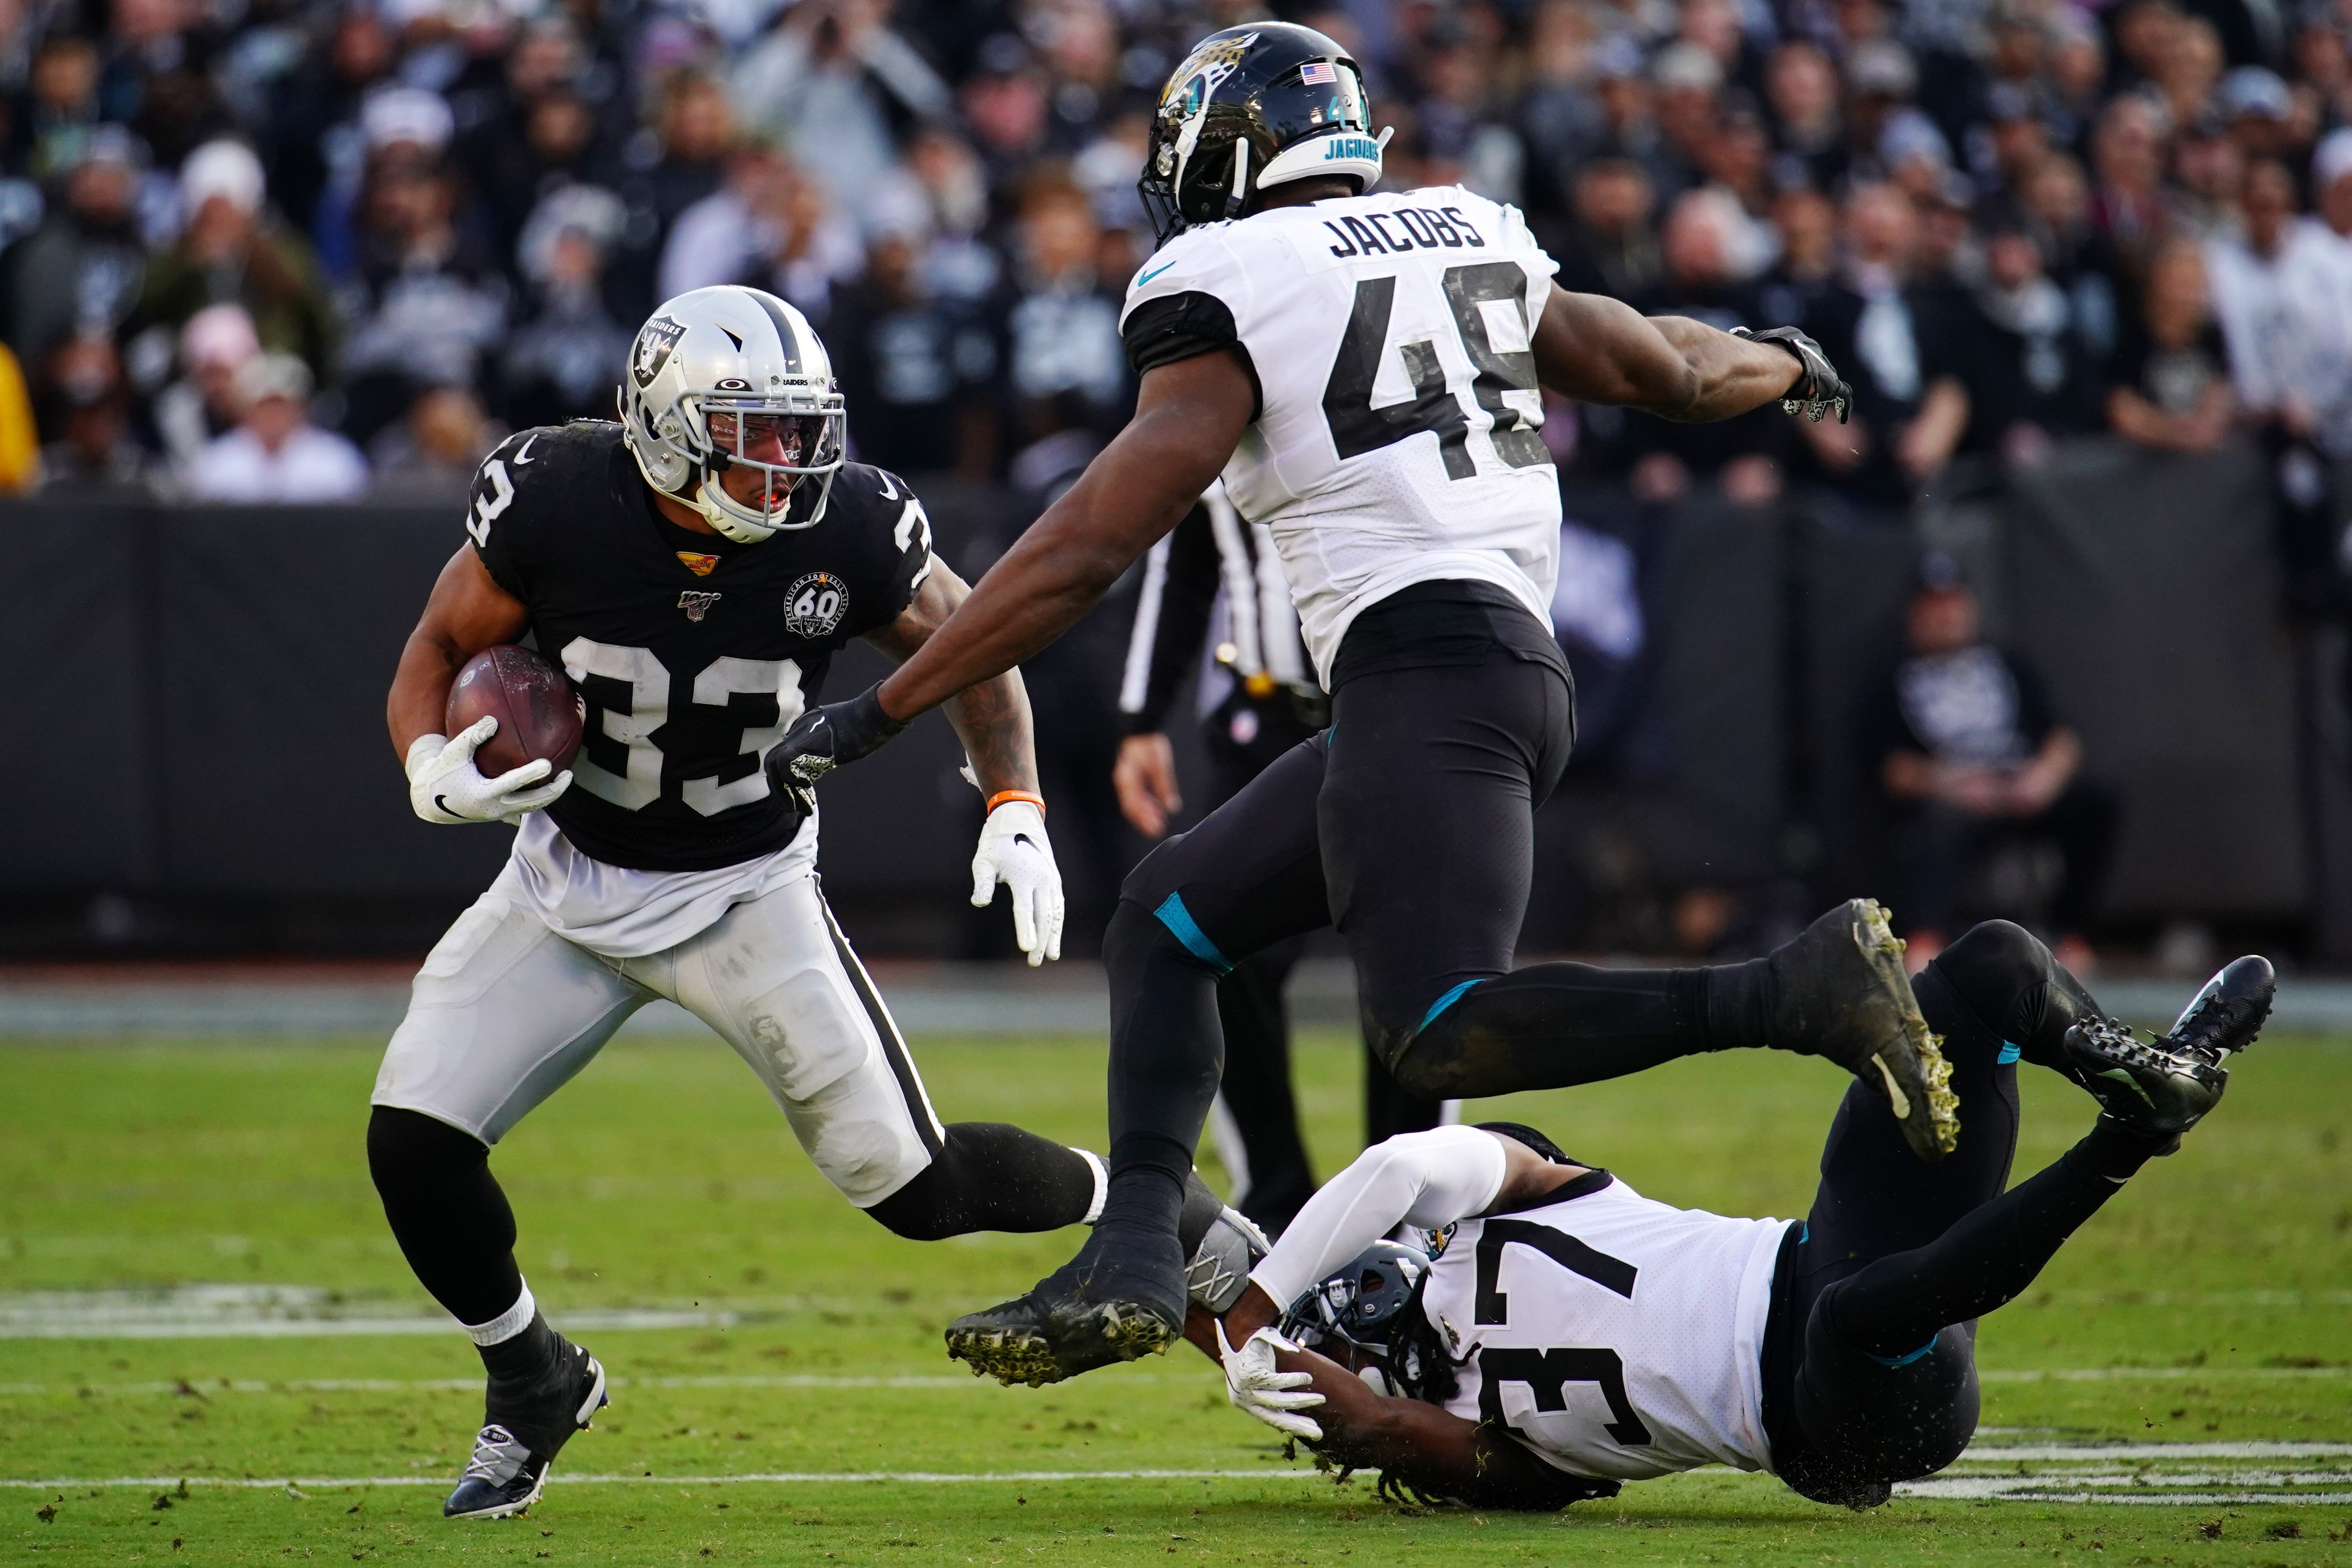 A Raiders player runs the ball in a game against the Jacksonville Jaguars